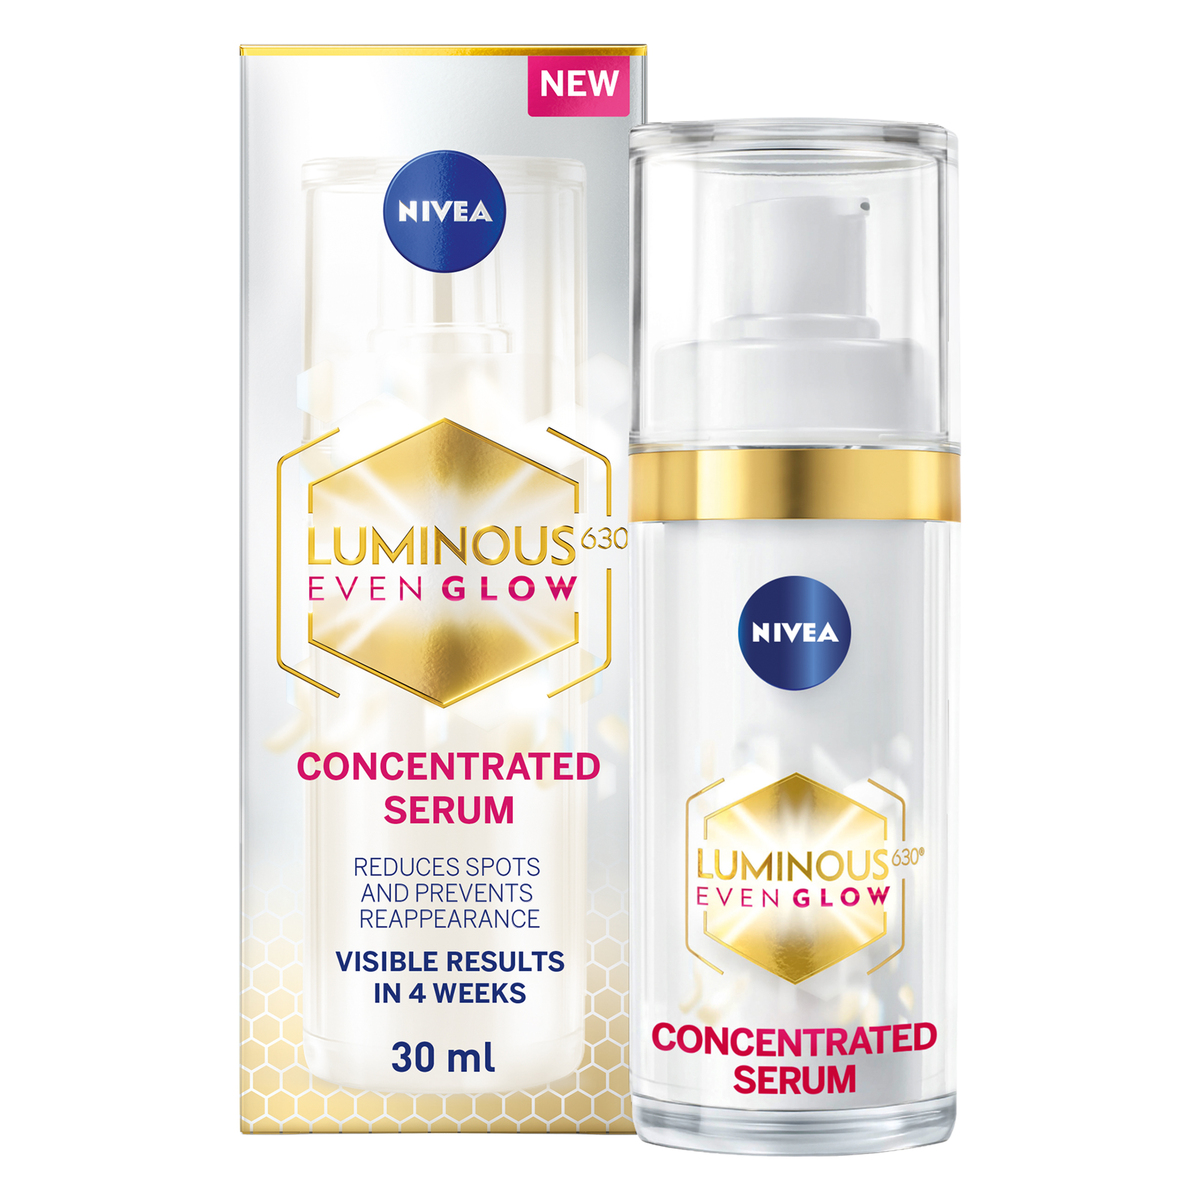 Nivea Luminous 630 Even Glow Concentrated Face Serum 30 ml